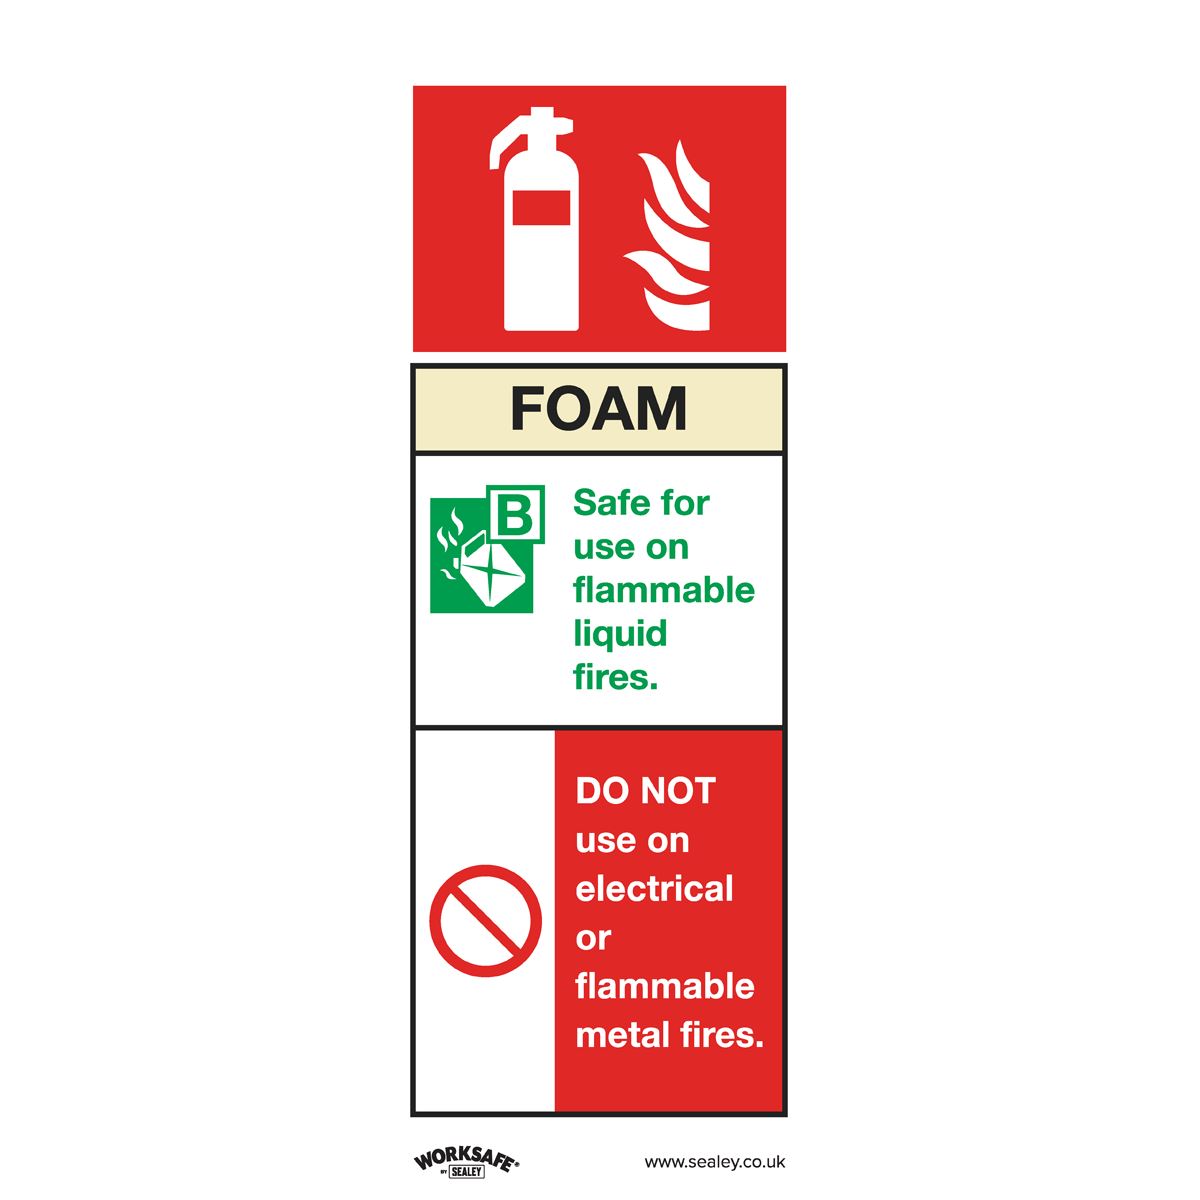 Worksafe by Sealey Safe Conditions Safety Sign - Foam Fire Extinguisher - Rigid Plastic